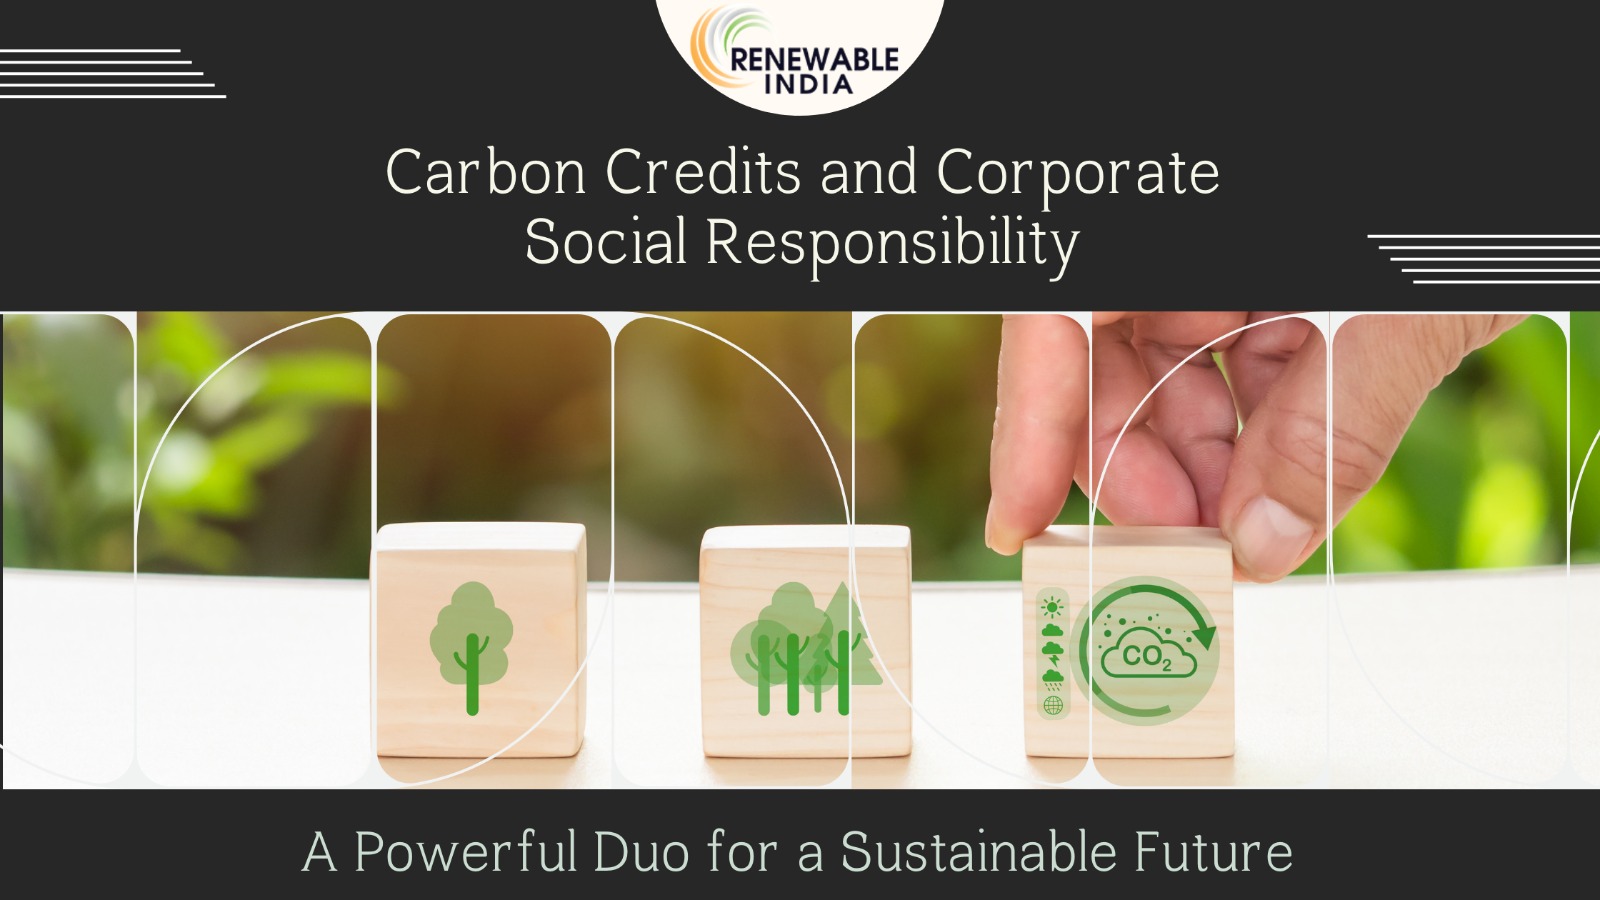 Carbon Credits and Corporate Social Responsibility: A Powerful Duo for a Sustainable Future